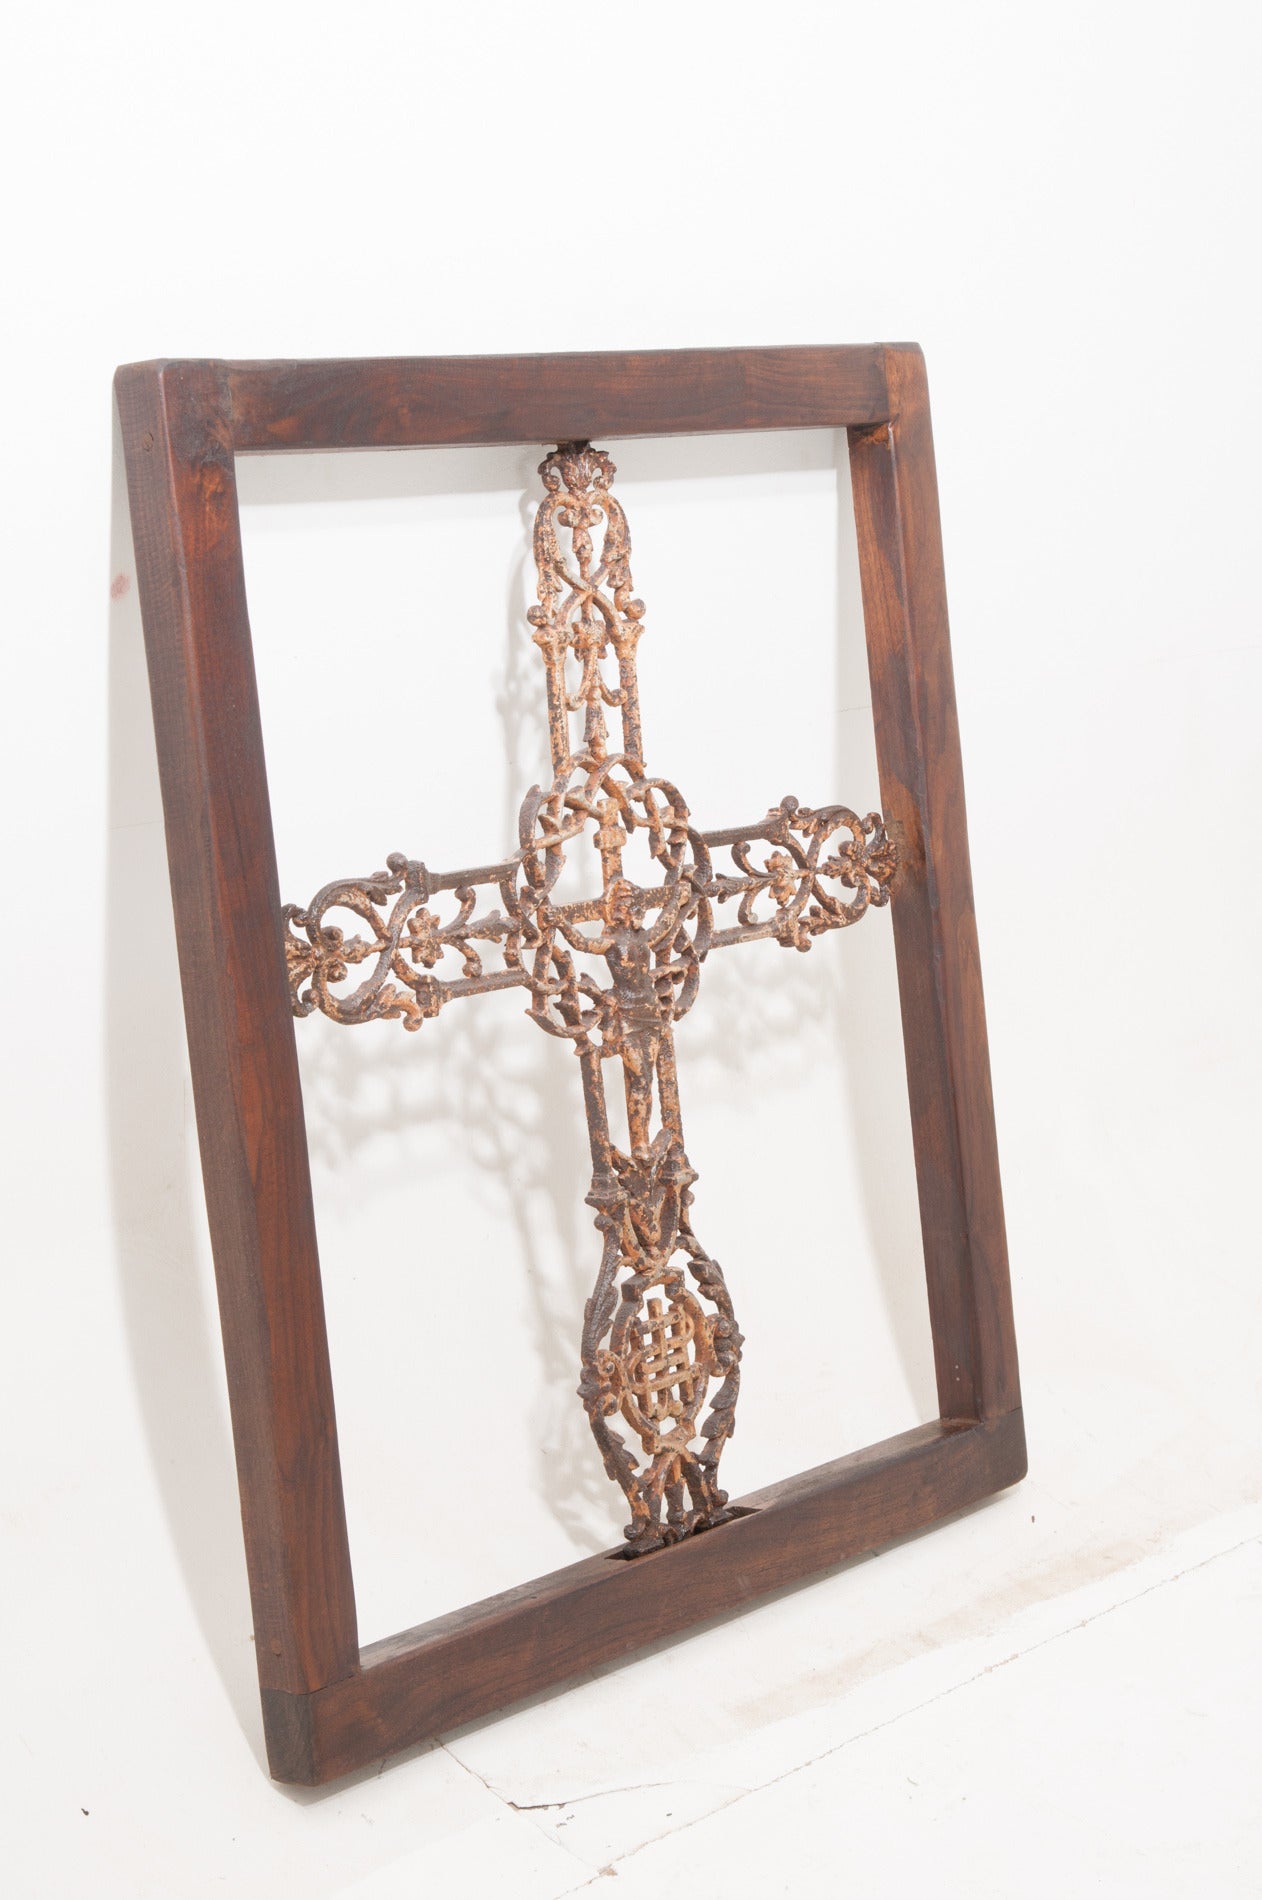 French cast iron cemetery cross with the crucifix in the center has its original old paint finish. We built a custom walnut frame to house this beautiful cross.